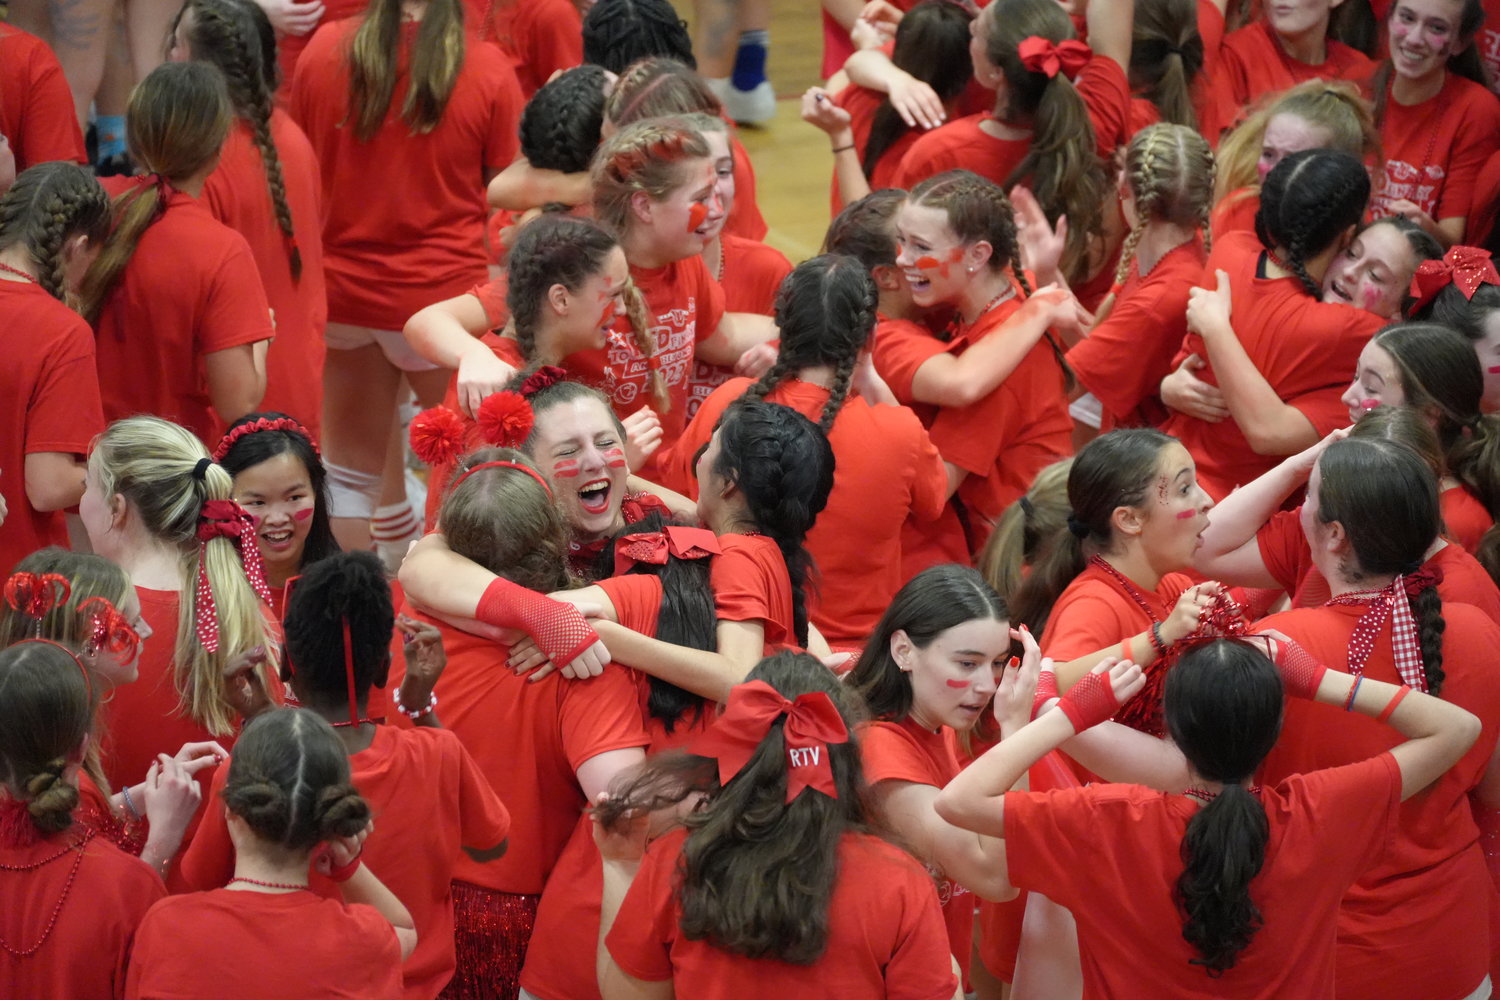 The Red team was declared the victors of the 2023 Red and Blue competition, taking back the title for the first time since 2019.